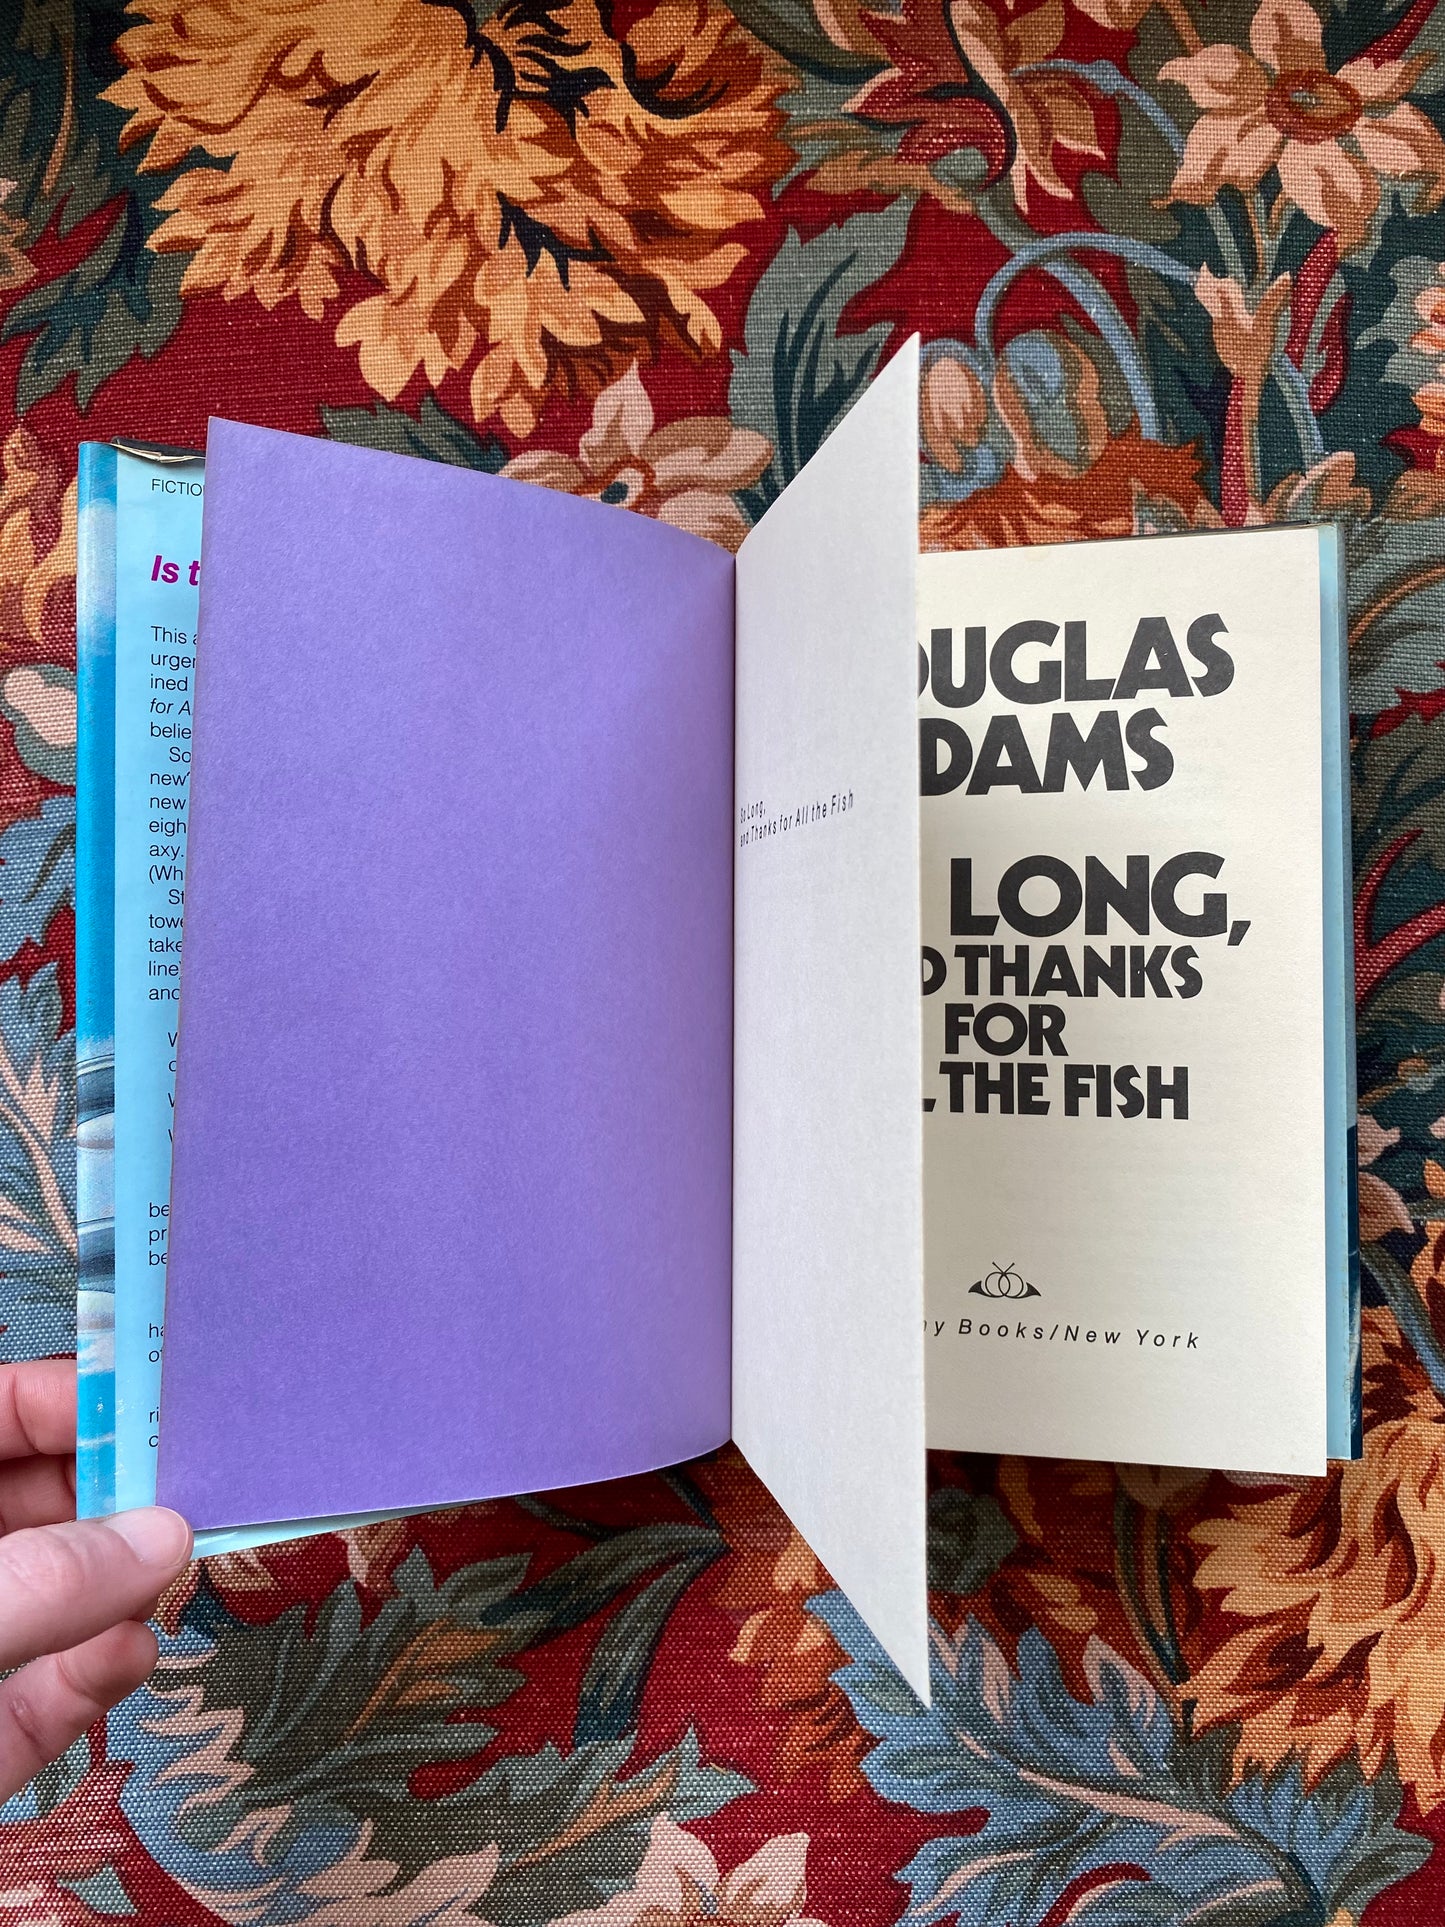 So Long and Thanks for all the Fish by Douglas Adams